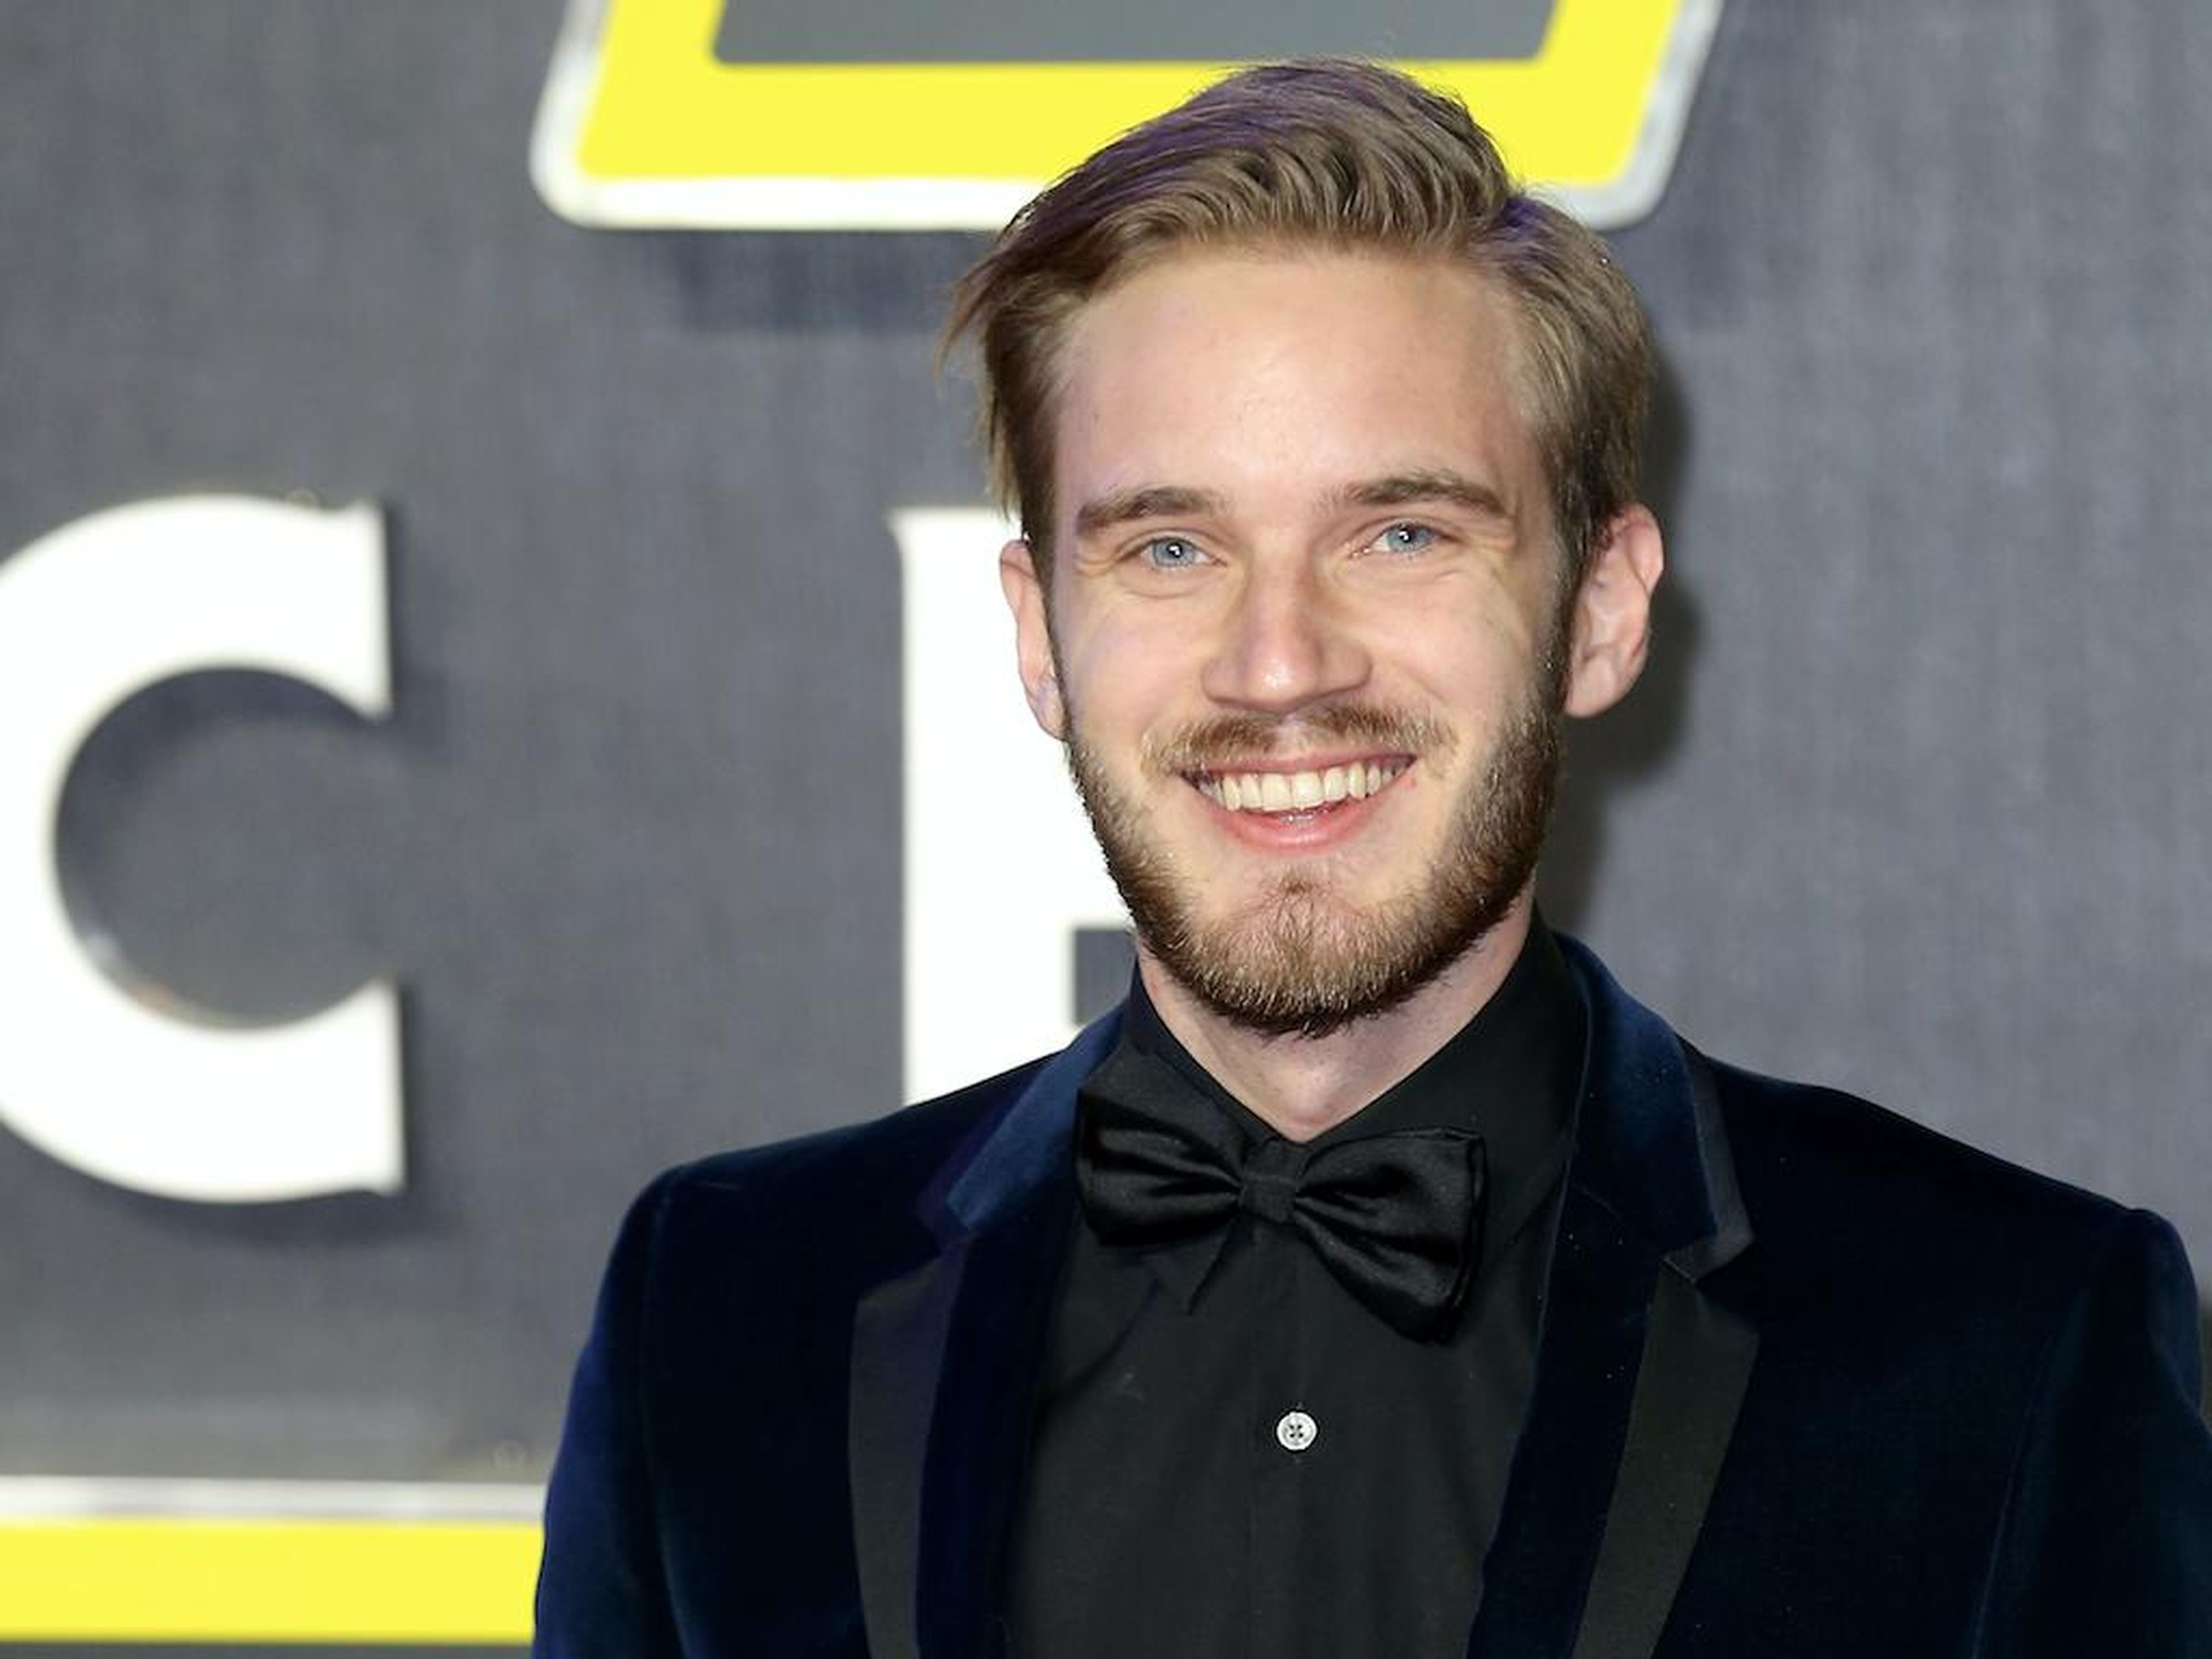 Kjellberg announced Monday he would be taking a break from YouTube "for a little while" in early 2020. "I'm feeling very tired, I don't know if you can tell," Kjellberg said in a video to his fans. This isn't the first break